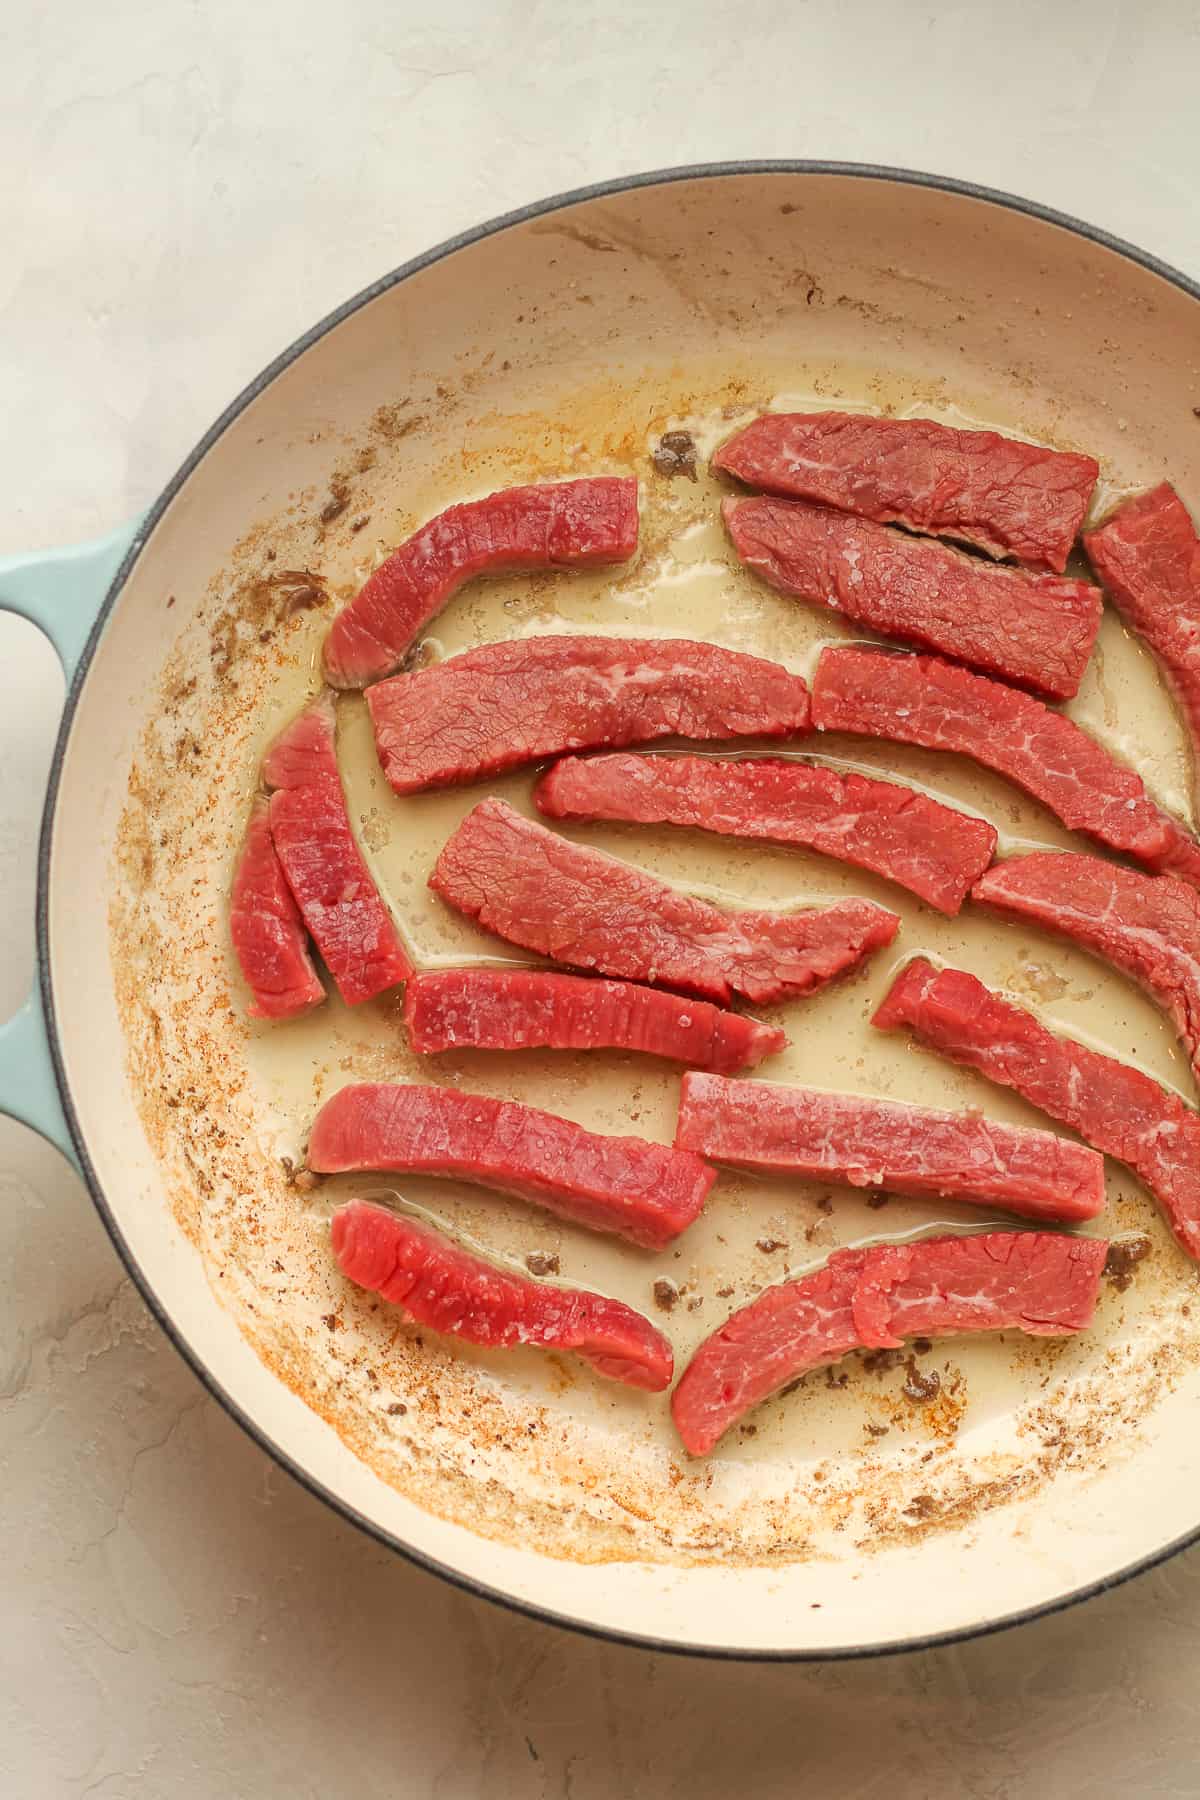 A pan of the raw steak.